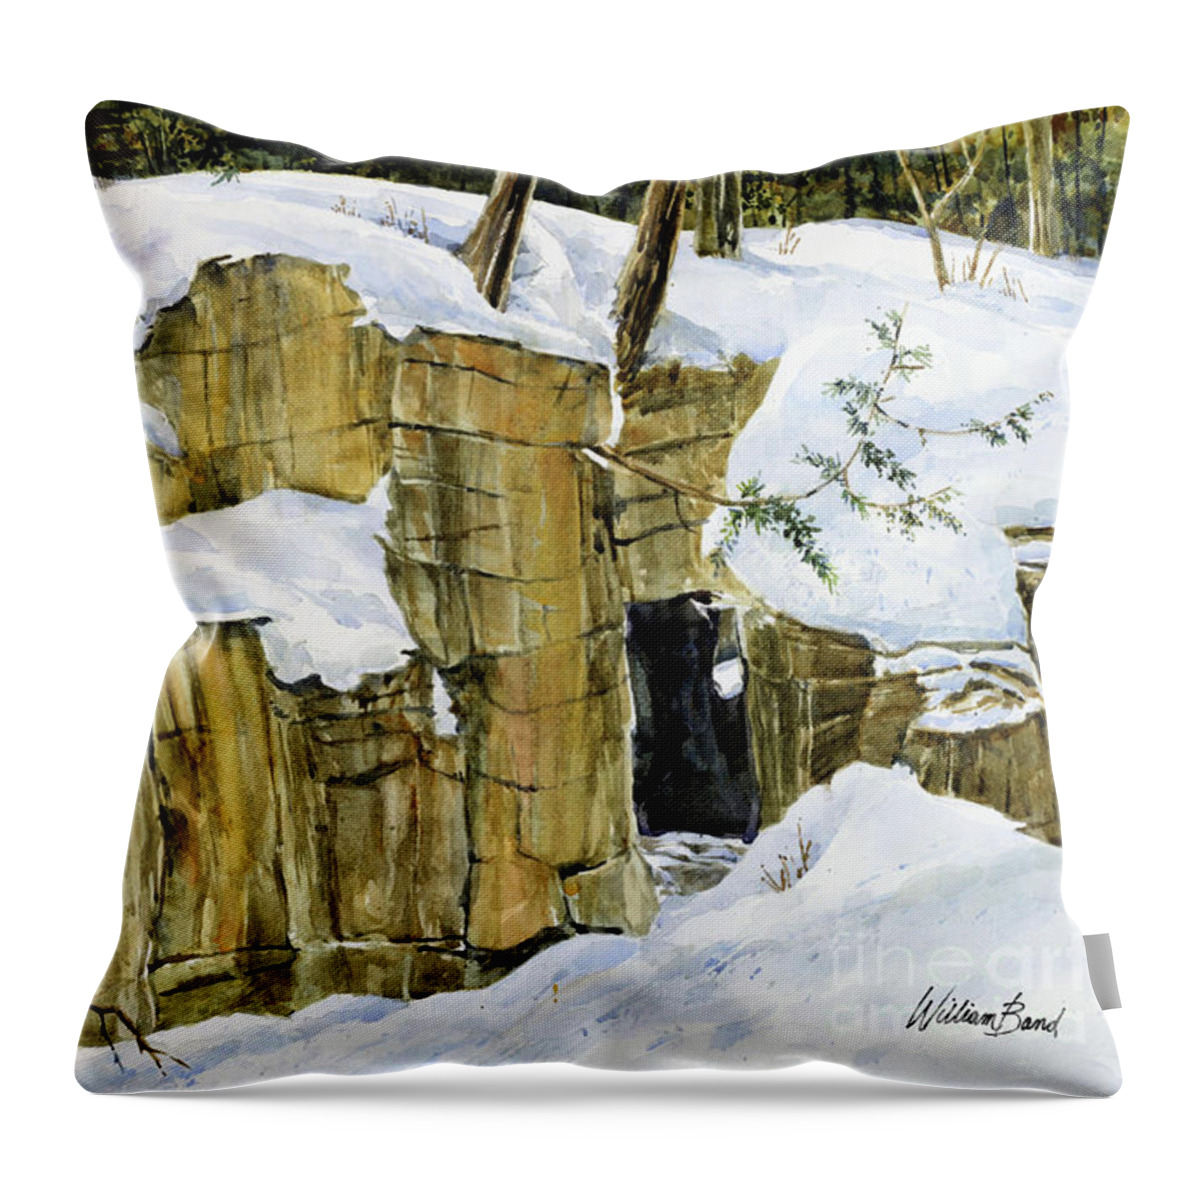 Landscape Throw Pillow featuring the painting Winter Walk by William Band